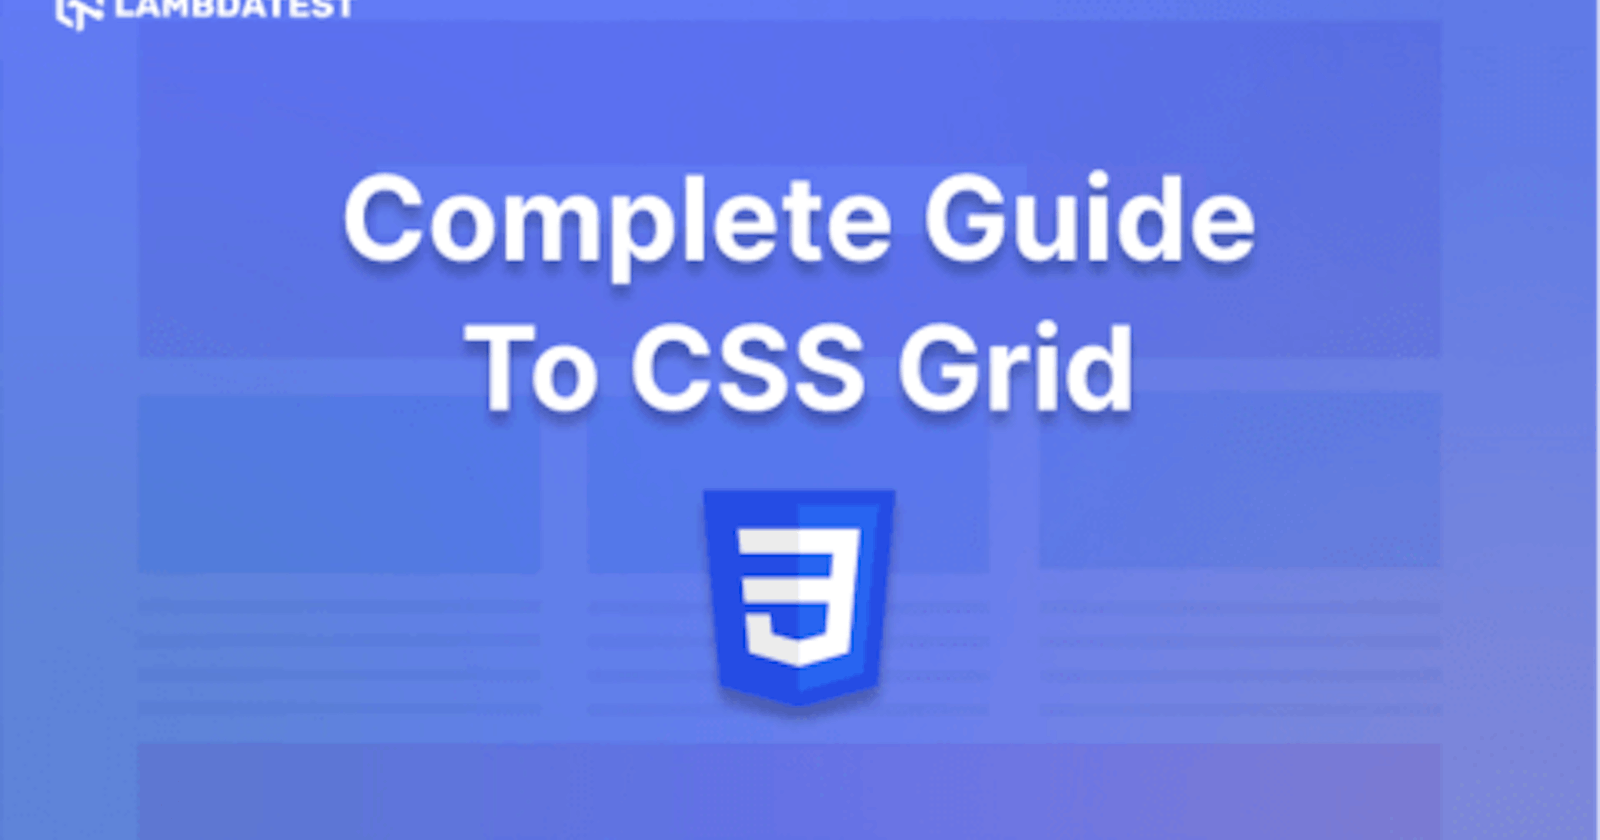 A Complete Guide To CSS Grid